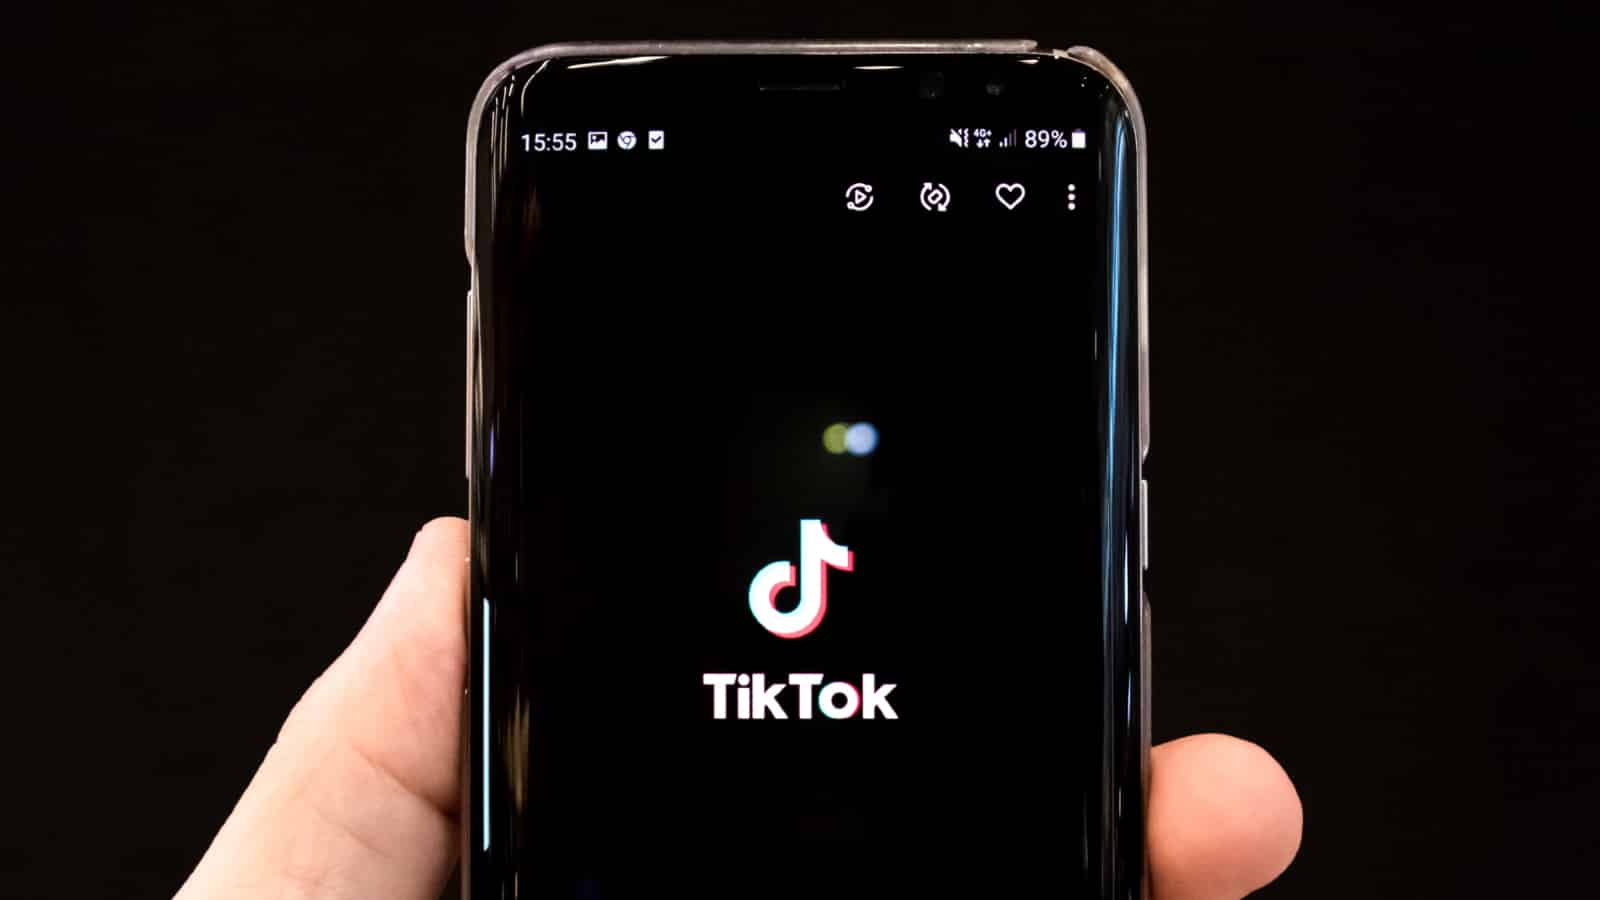 Hand holding a phone with the TikTok logo on it